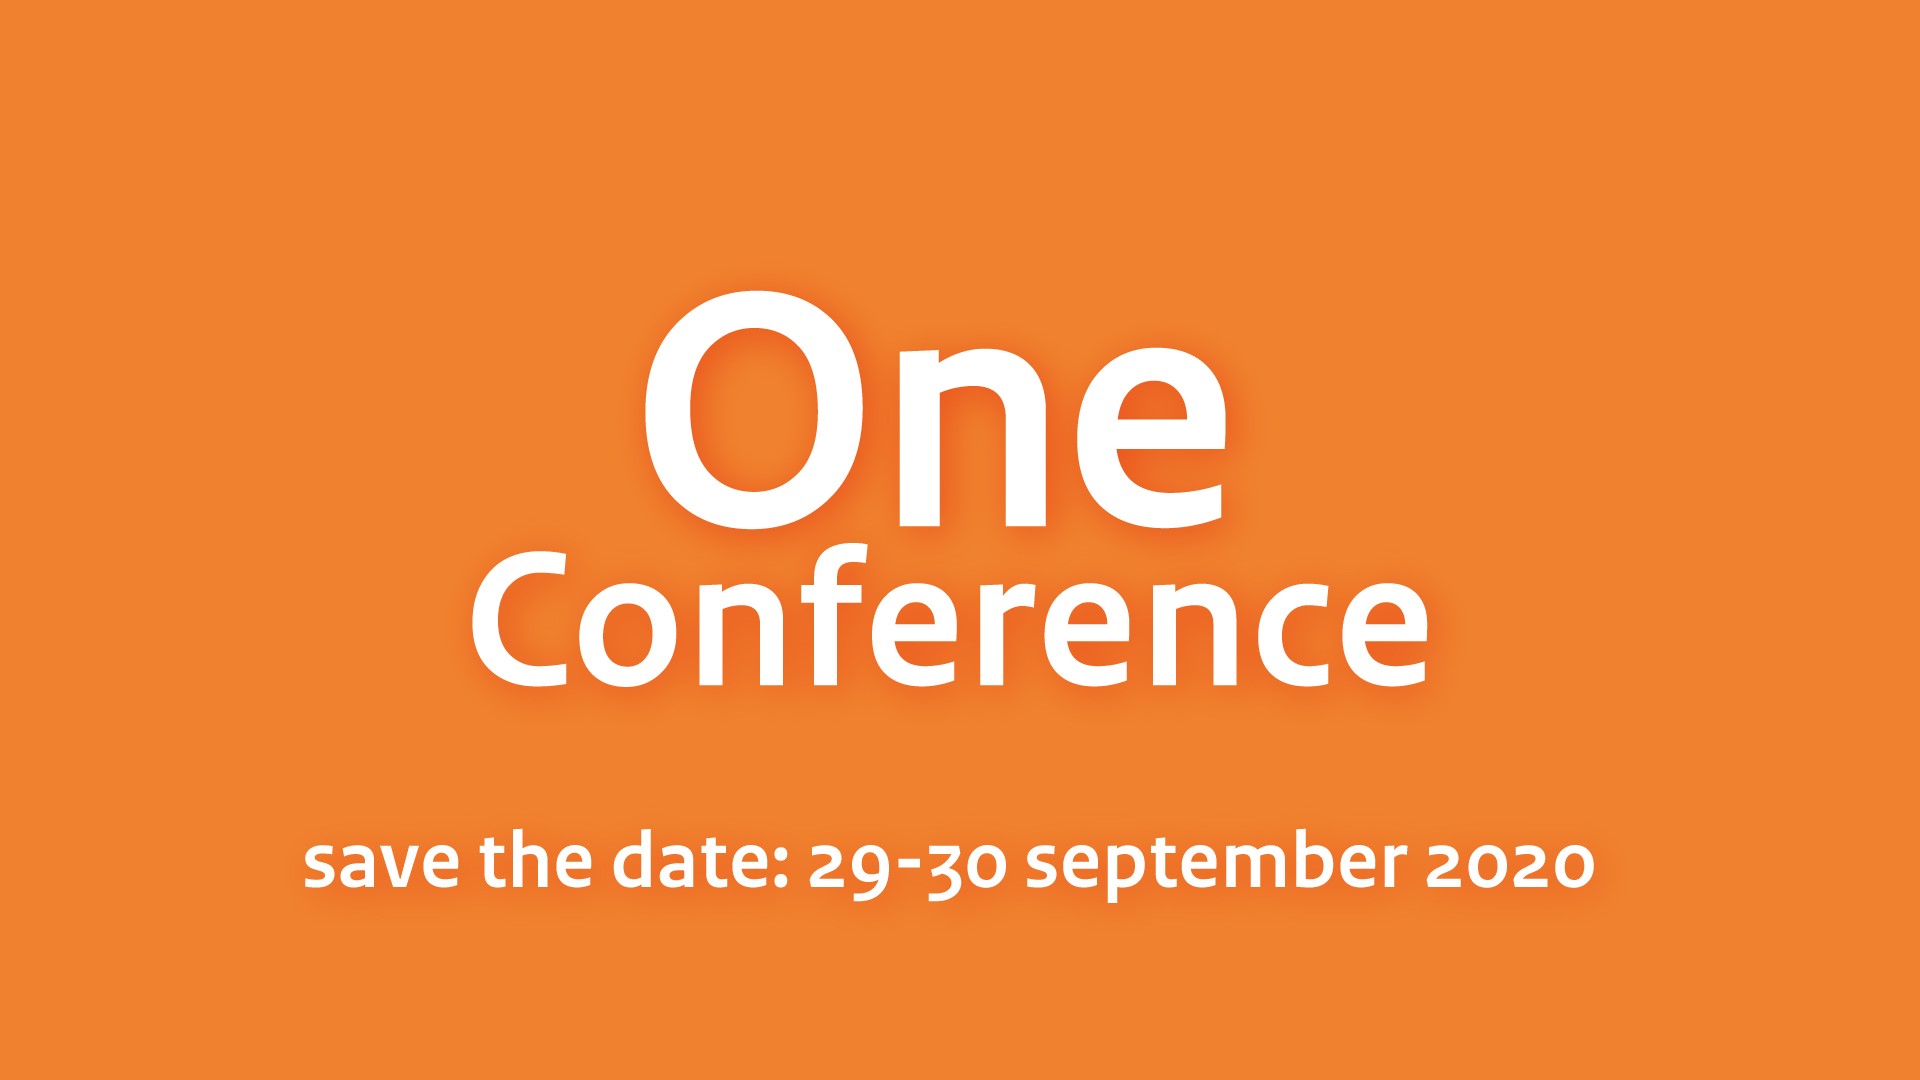 One Conference 2020 save the date